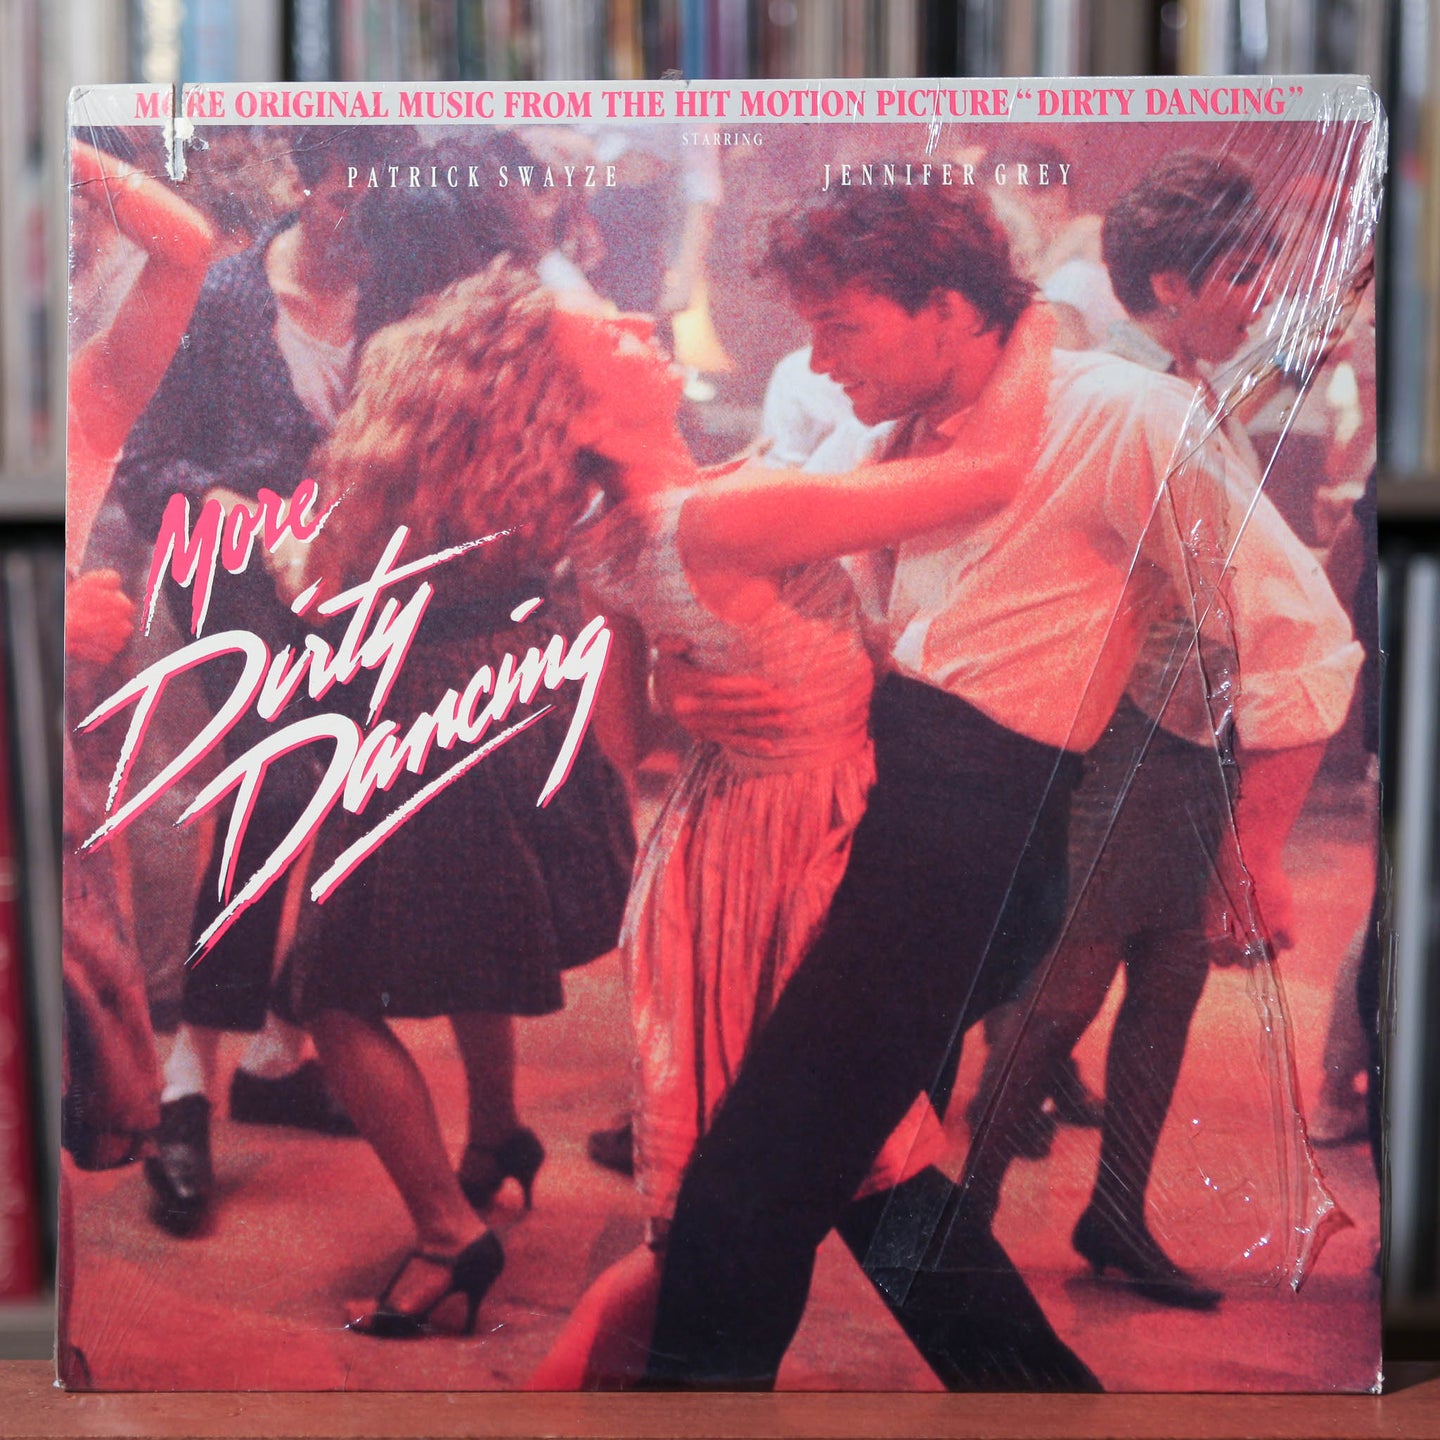 More Dirty Dancing - Original Motion Picture Soundtrack - 1988 RCA Victor, VG+/EX w/Shrink